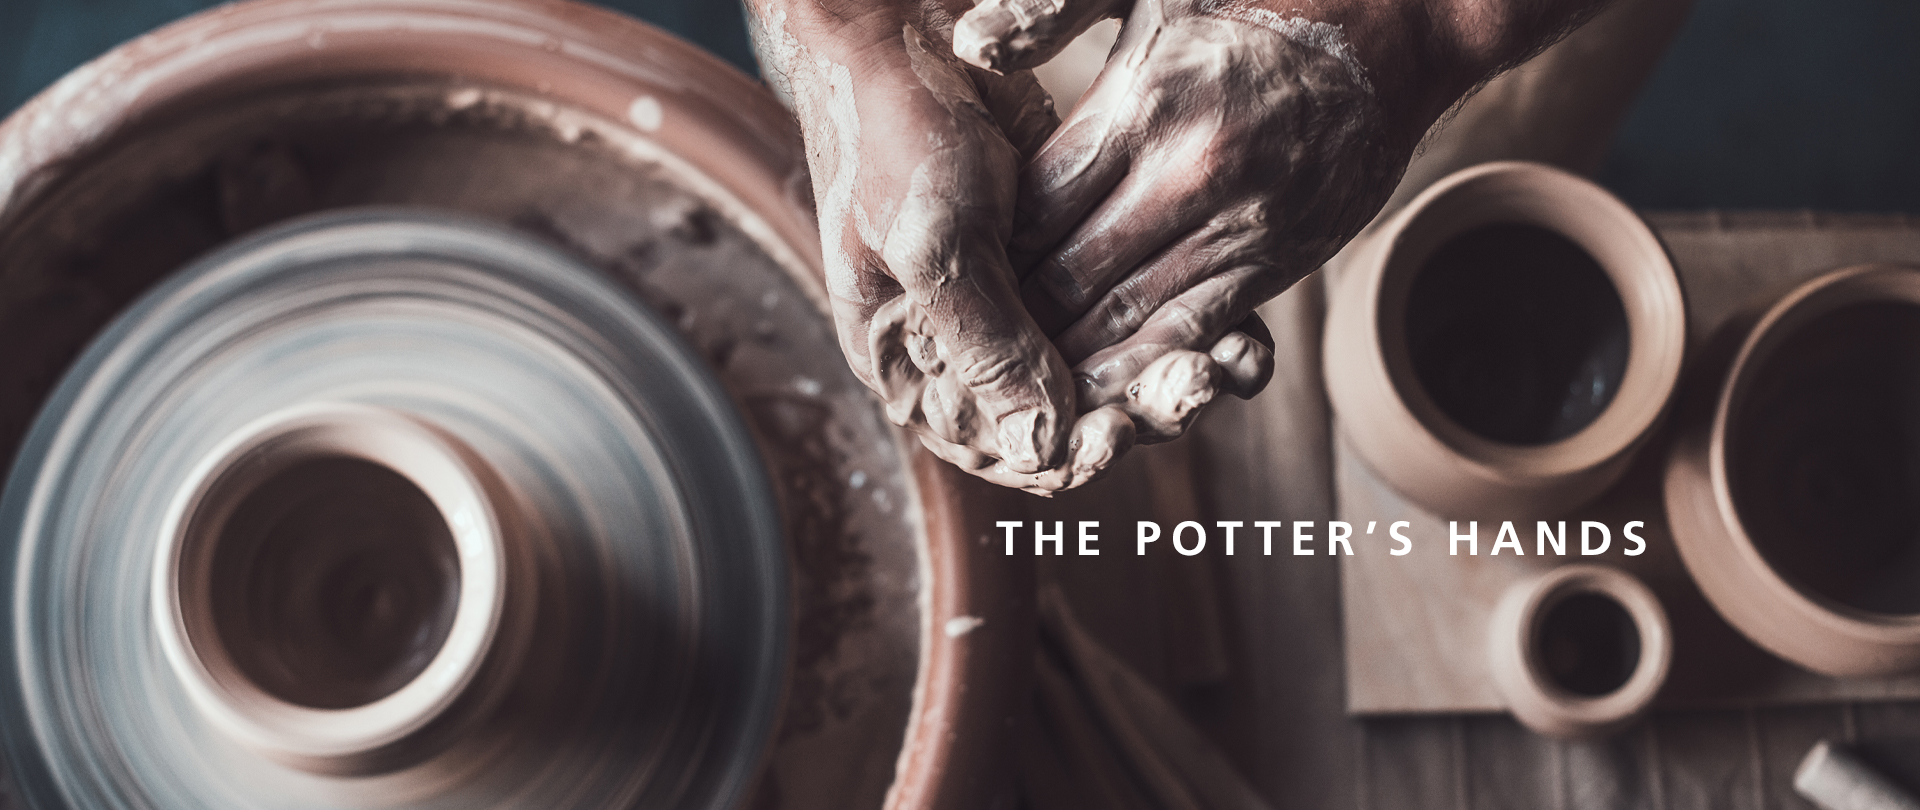 The Potter's Hands
A Restoration, Reconciliation,
& Recovery Ministry
Mondays, 6:30 PM
